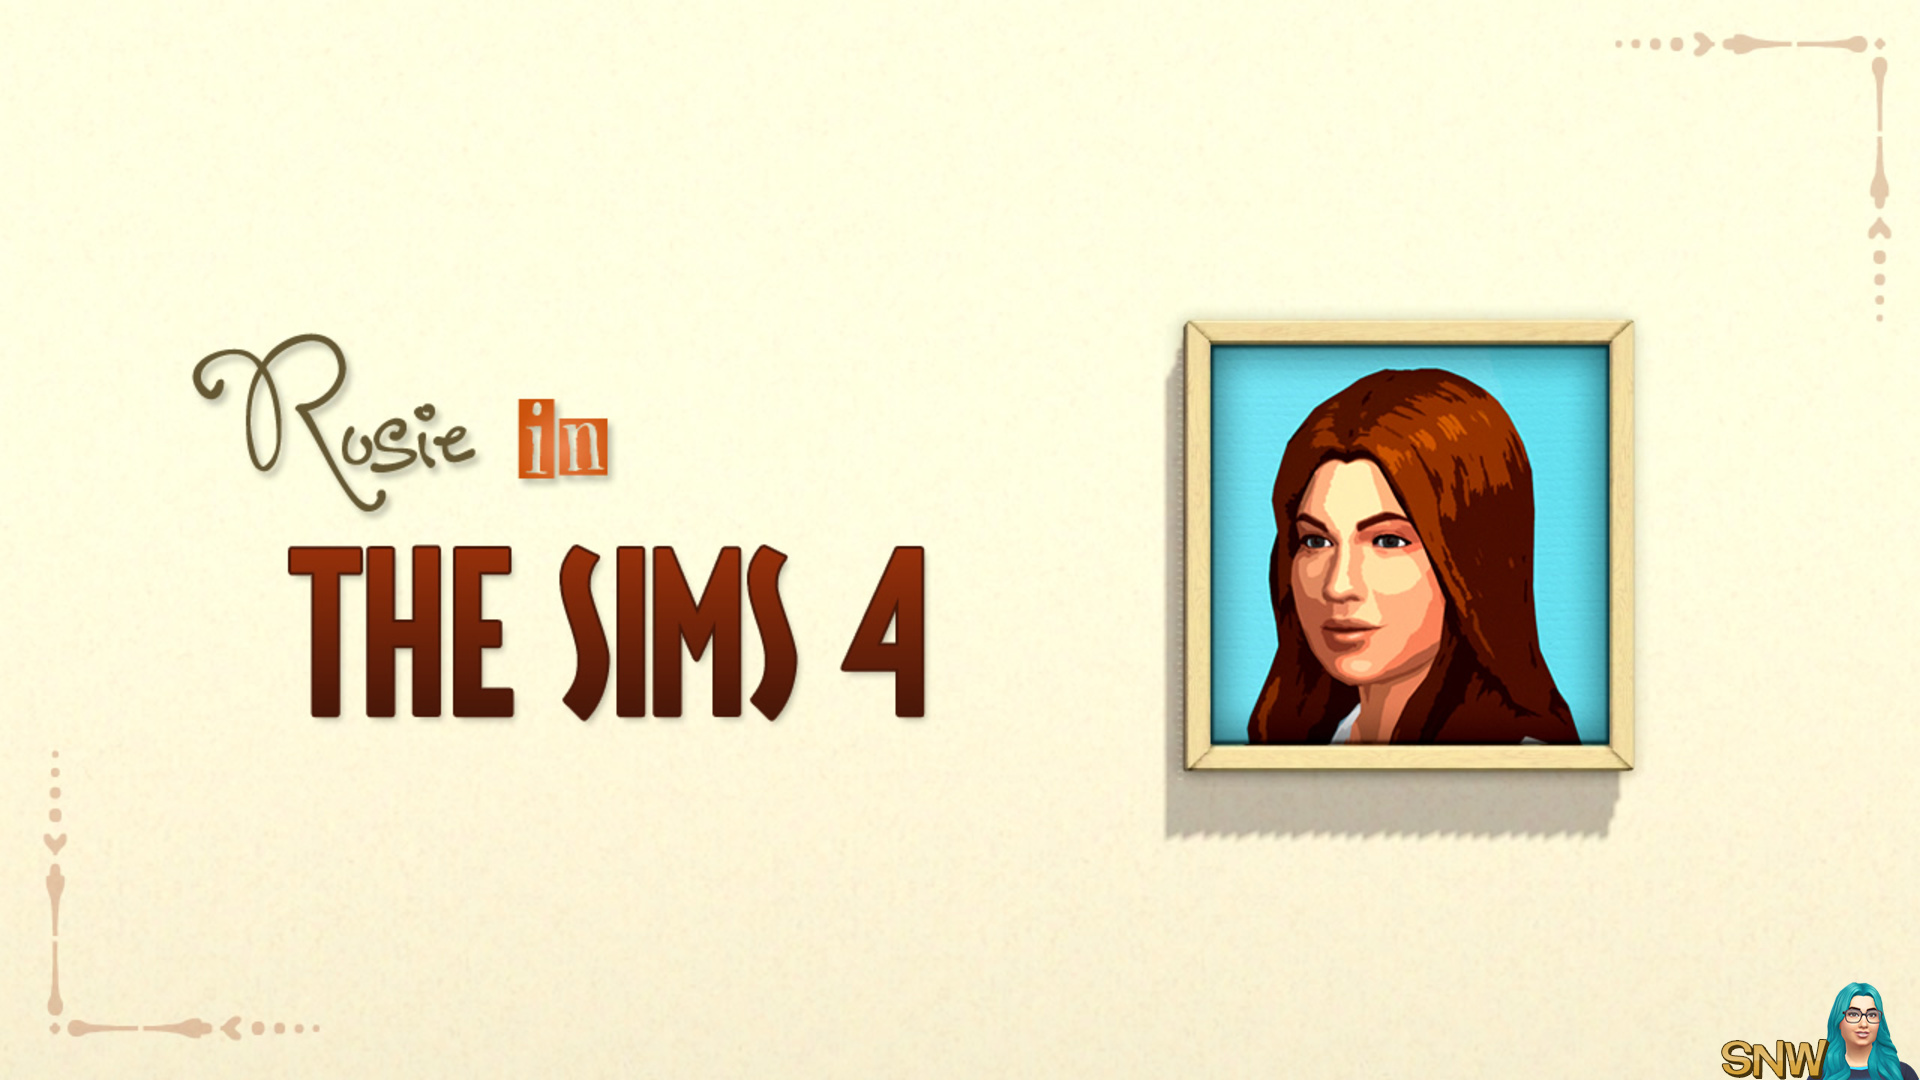 Rosie in The Sims 4 painting